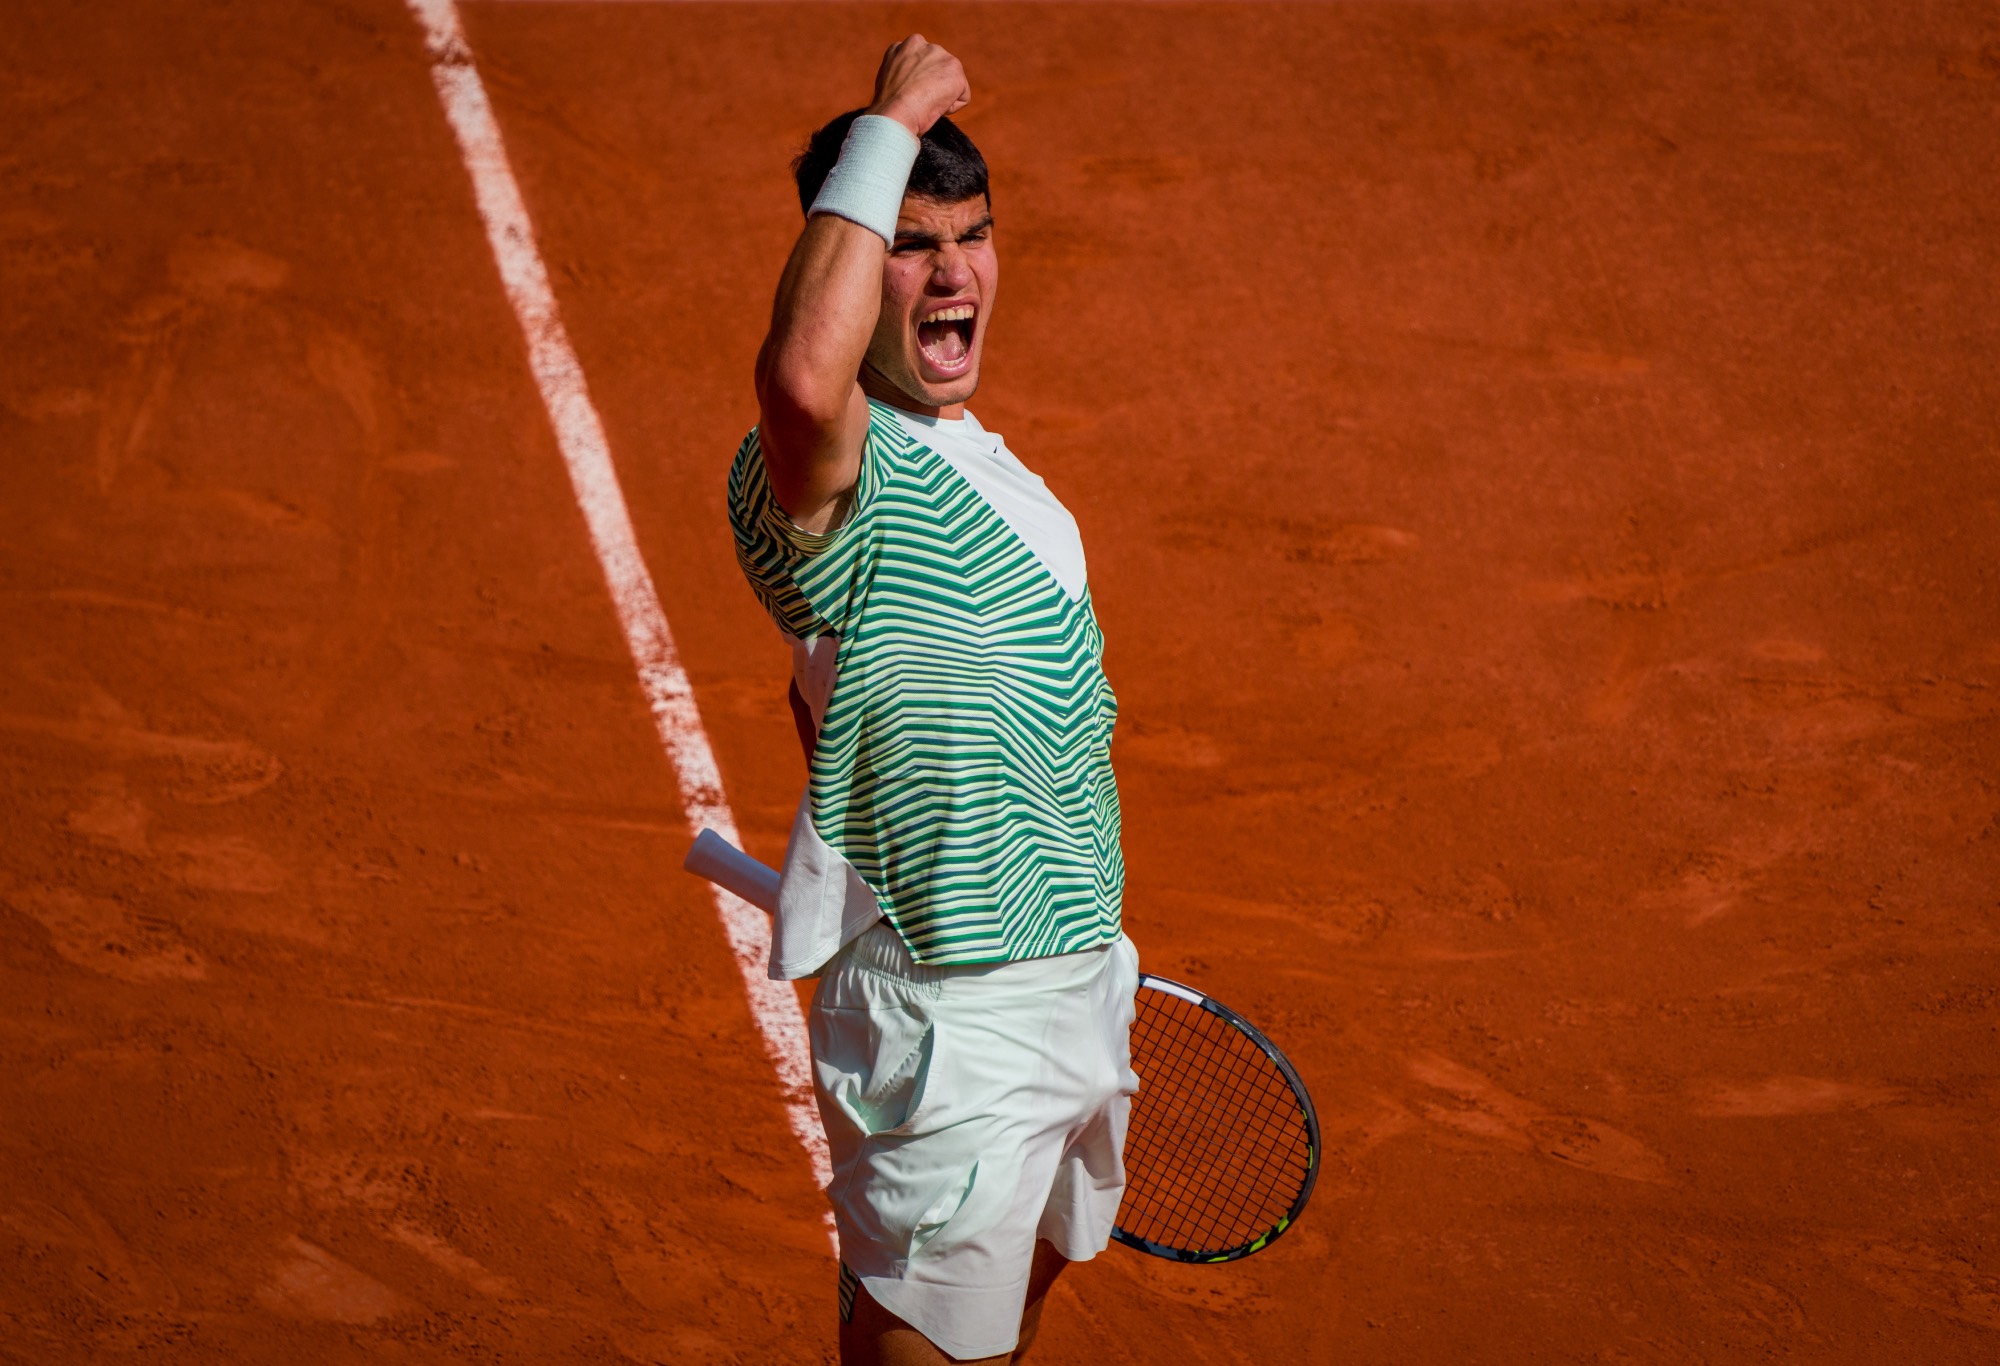 Carlos Alcaraz of Spain celebrates winning a point during the Men's Singles Semi Final Match against Novak Djokovic of Serbia during Day 13 of the French Open at Roland Garros on June 9, 2023 in Paris, France. (Photo by Andy Cheung/Getty Images)